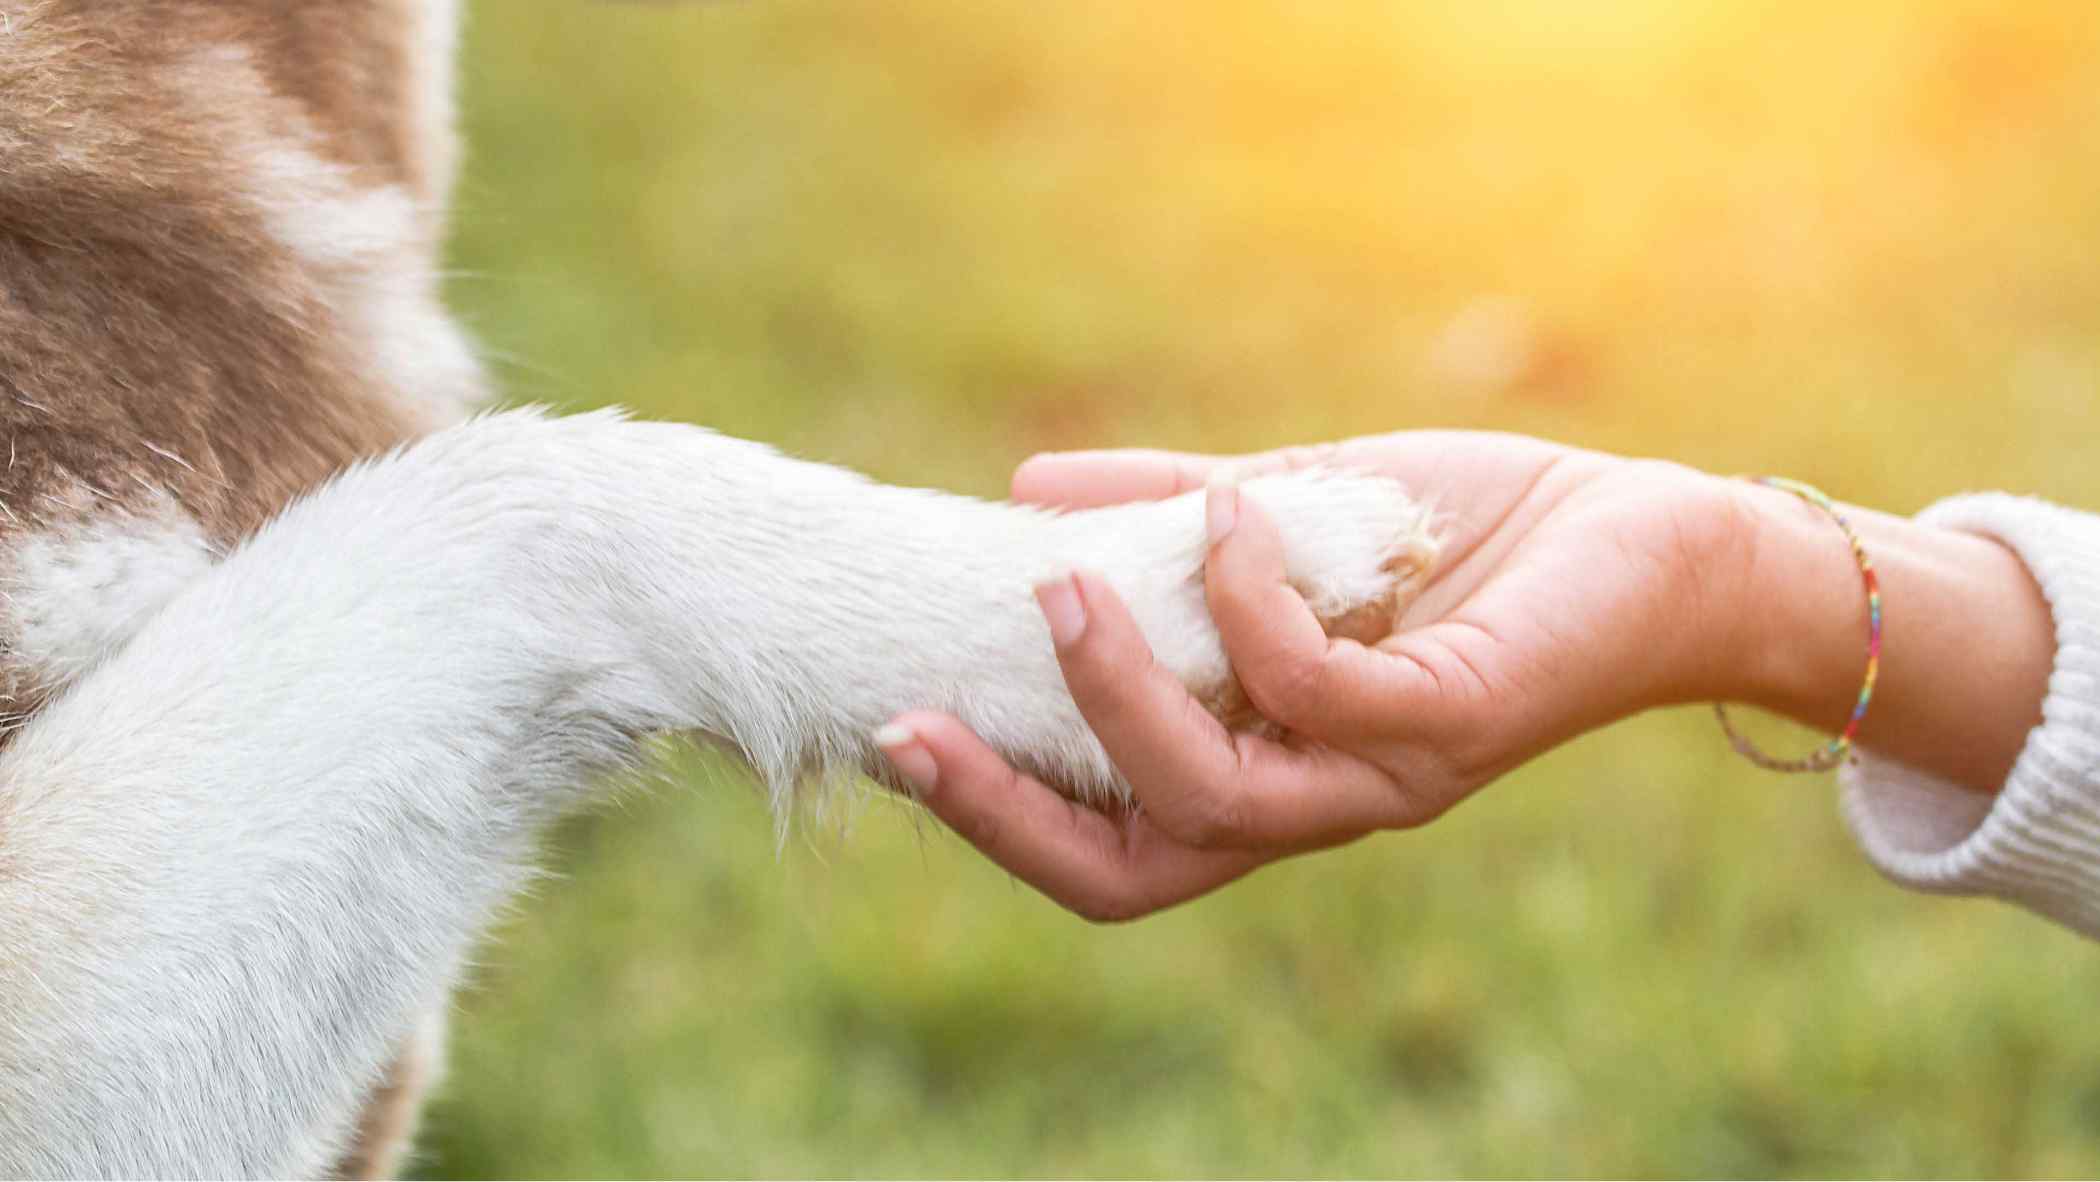 Dog and human shaking hands